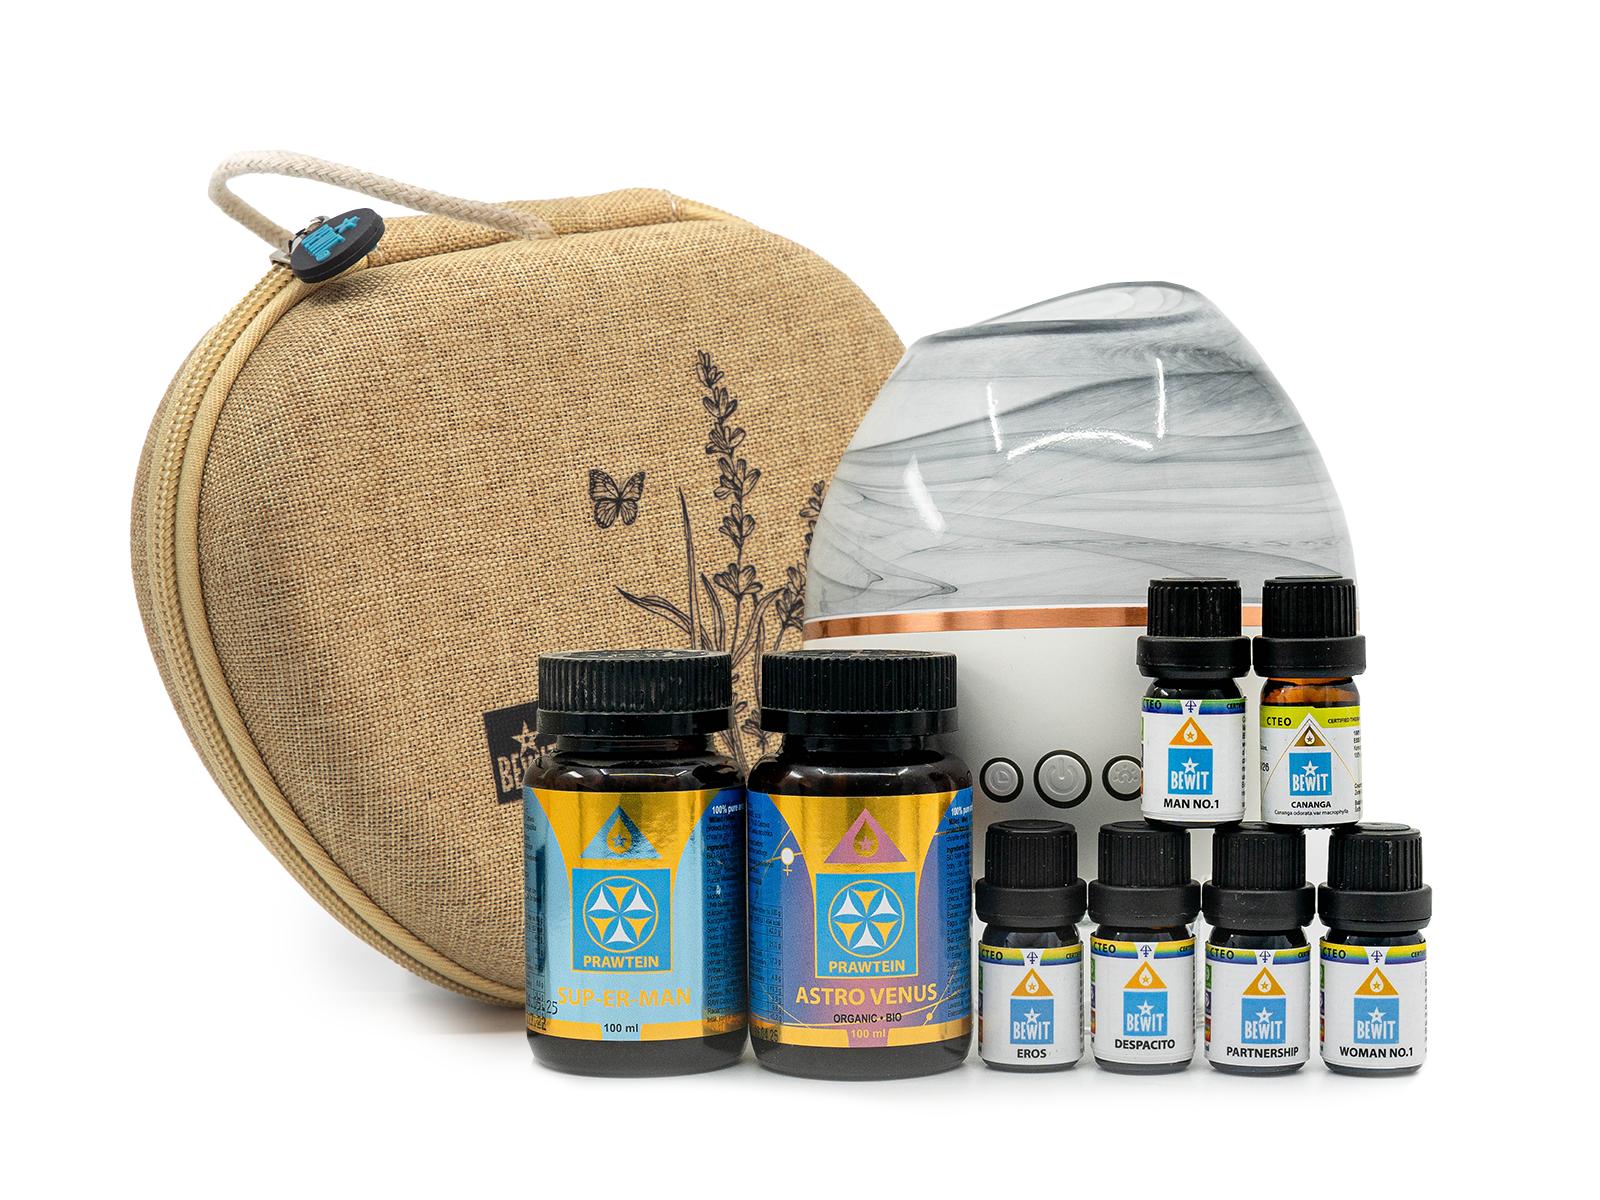 BEWIT Love and intimacy with diffuser - BEWIT Set - 1